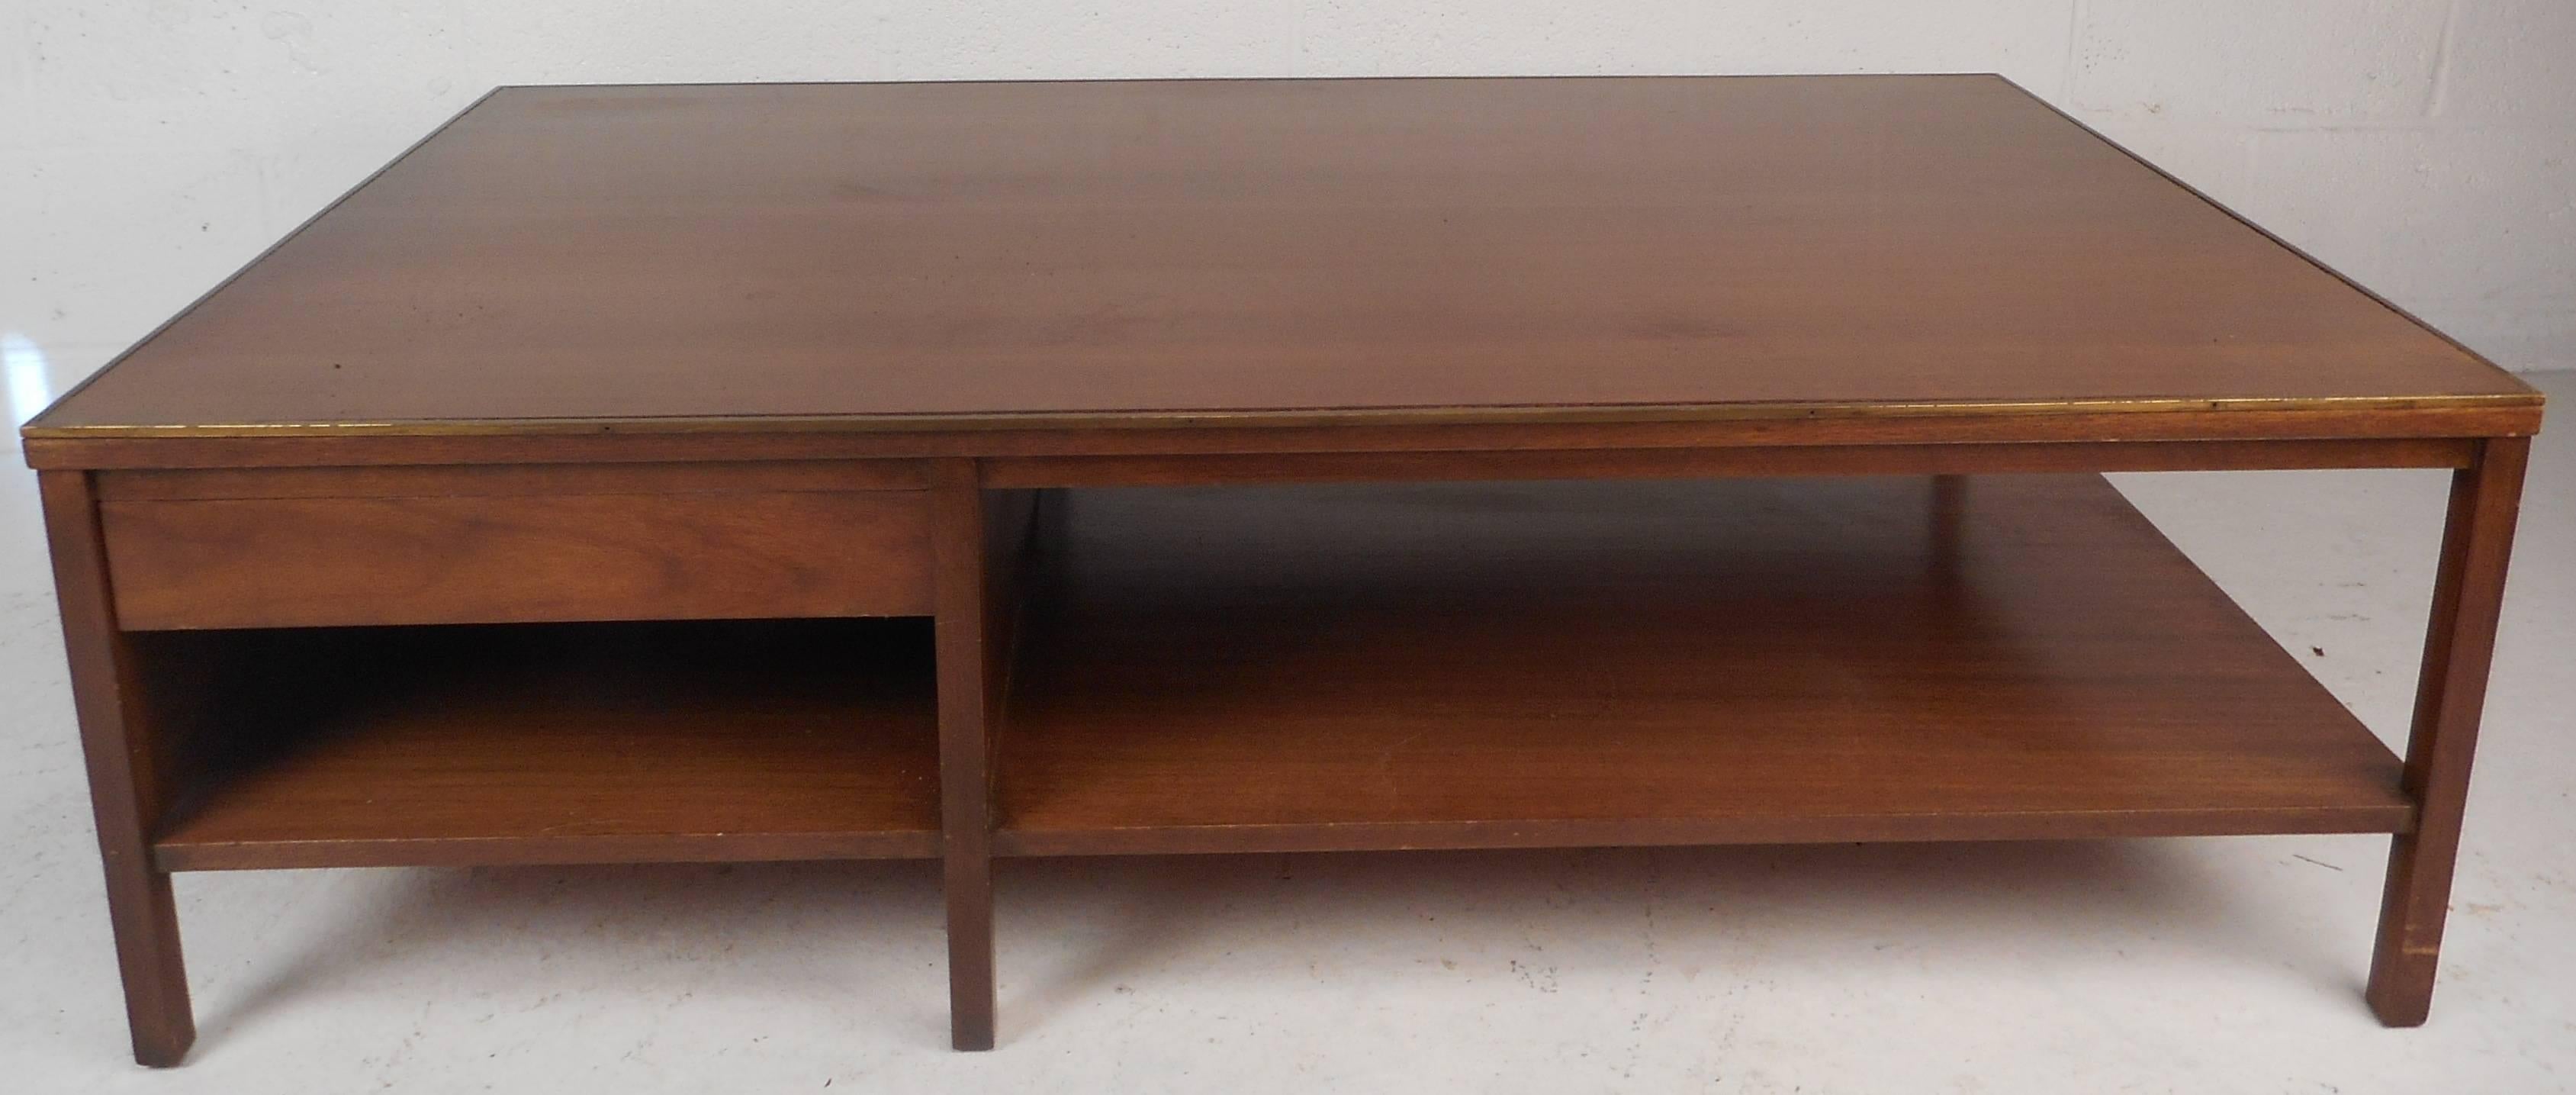 Mid-Century Modern Walnut Coffee Table in the Style of Paul McCobb In Good Condition For Sale In Brooklyn, NY